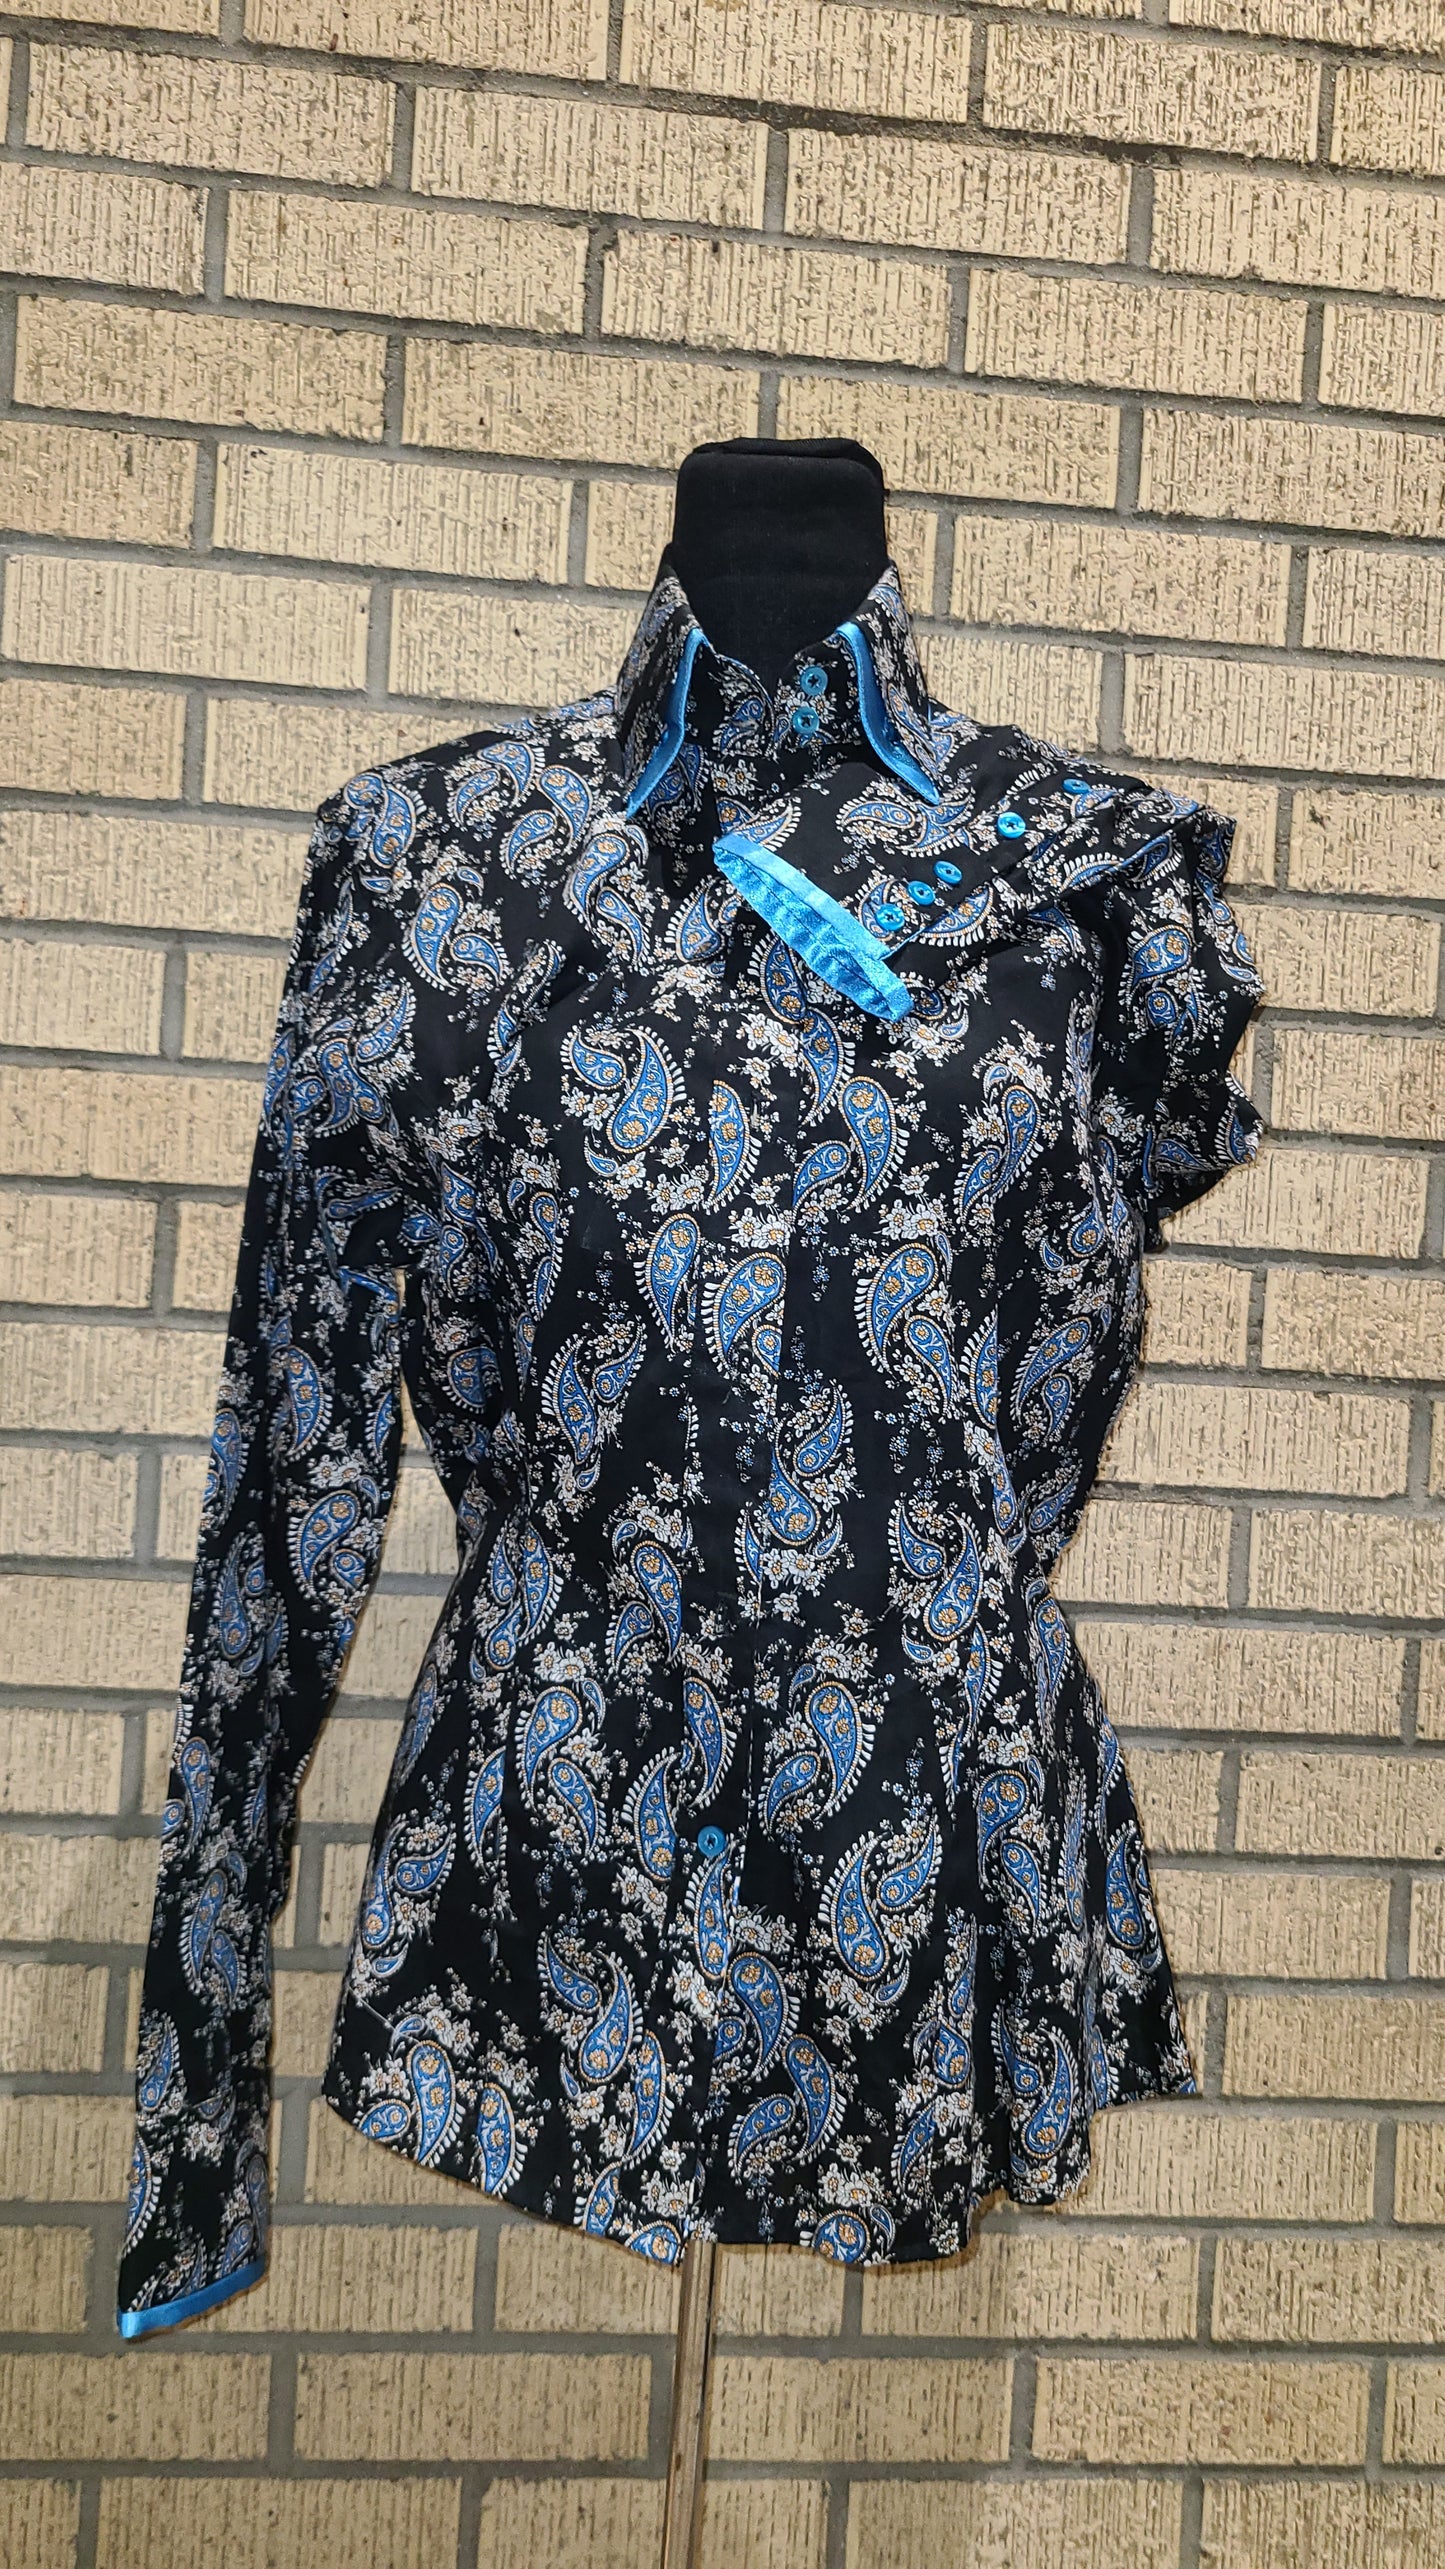 #paisley western shirt size large (bust 40) paisley print with light blue trims